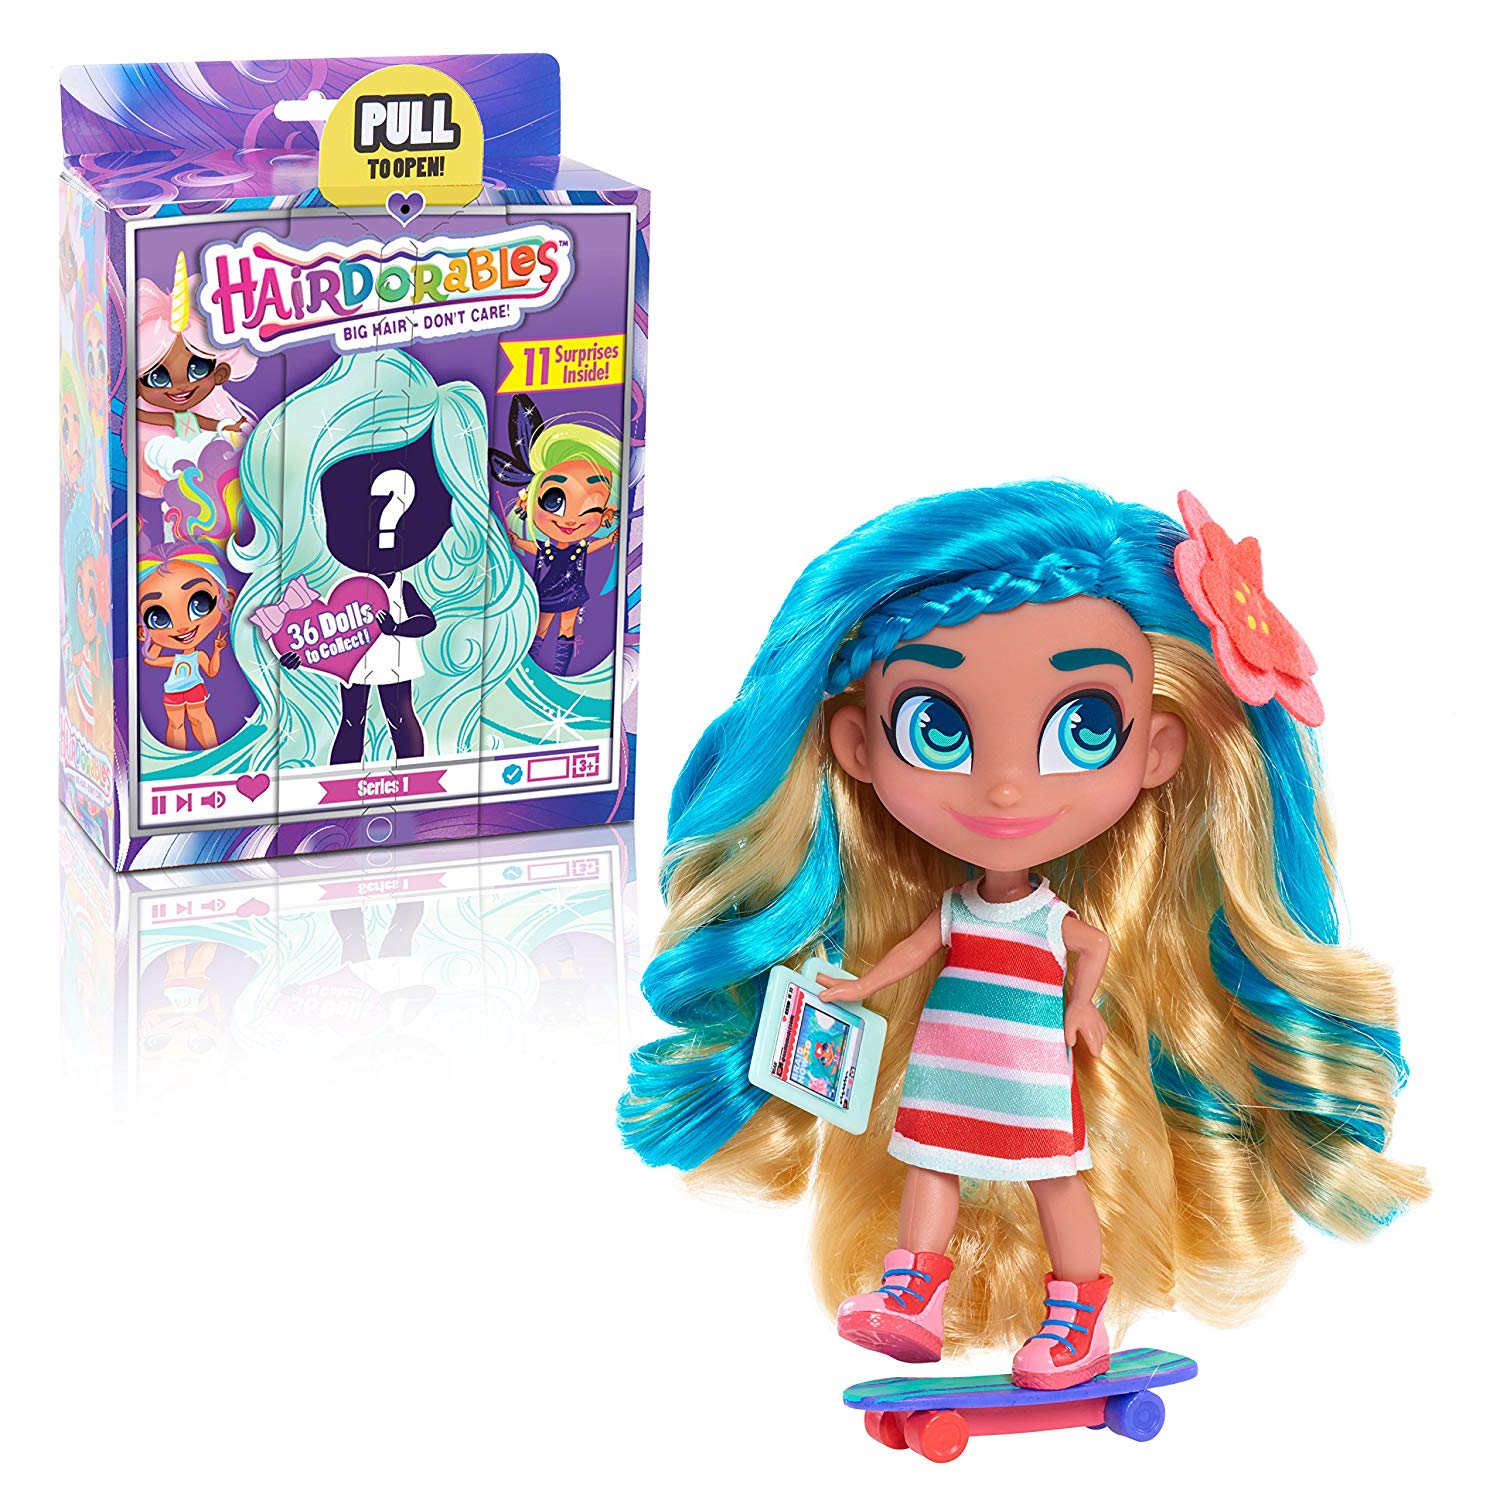 Hairdorables Collectible Surprise Dolls and Accessories Series 1 Only $12.88!